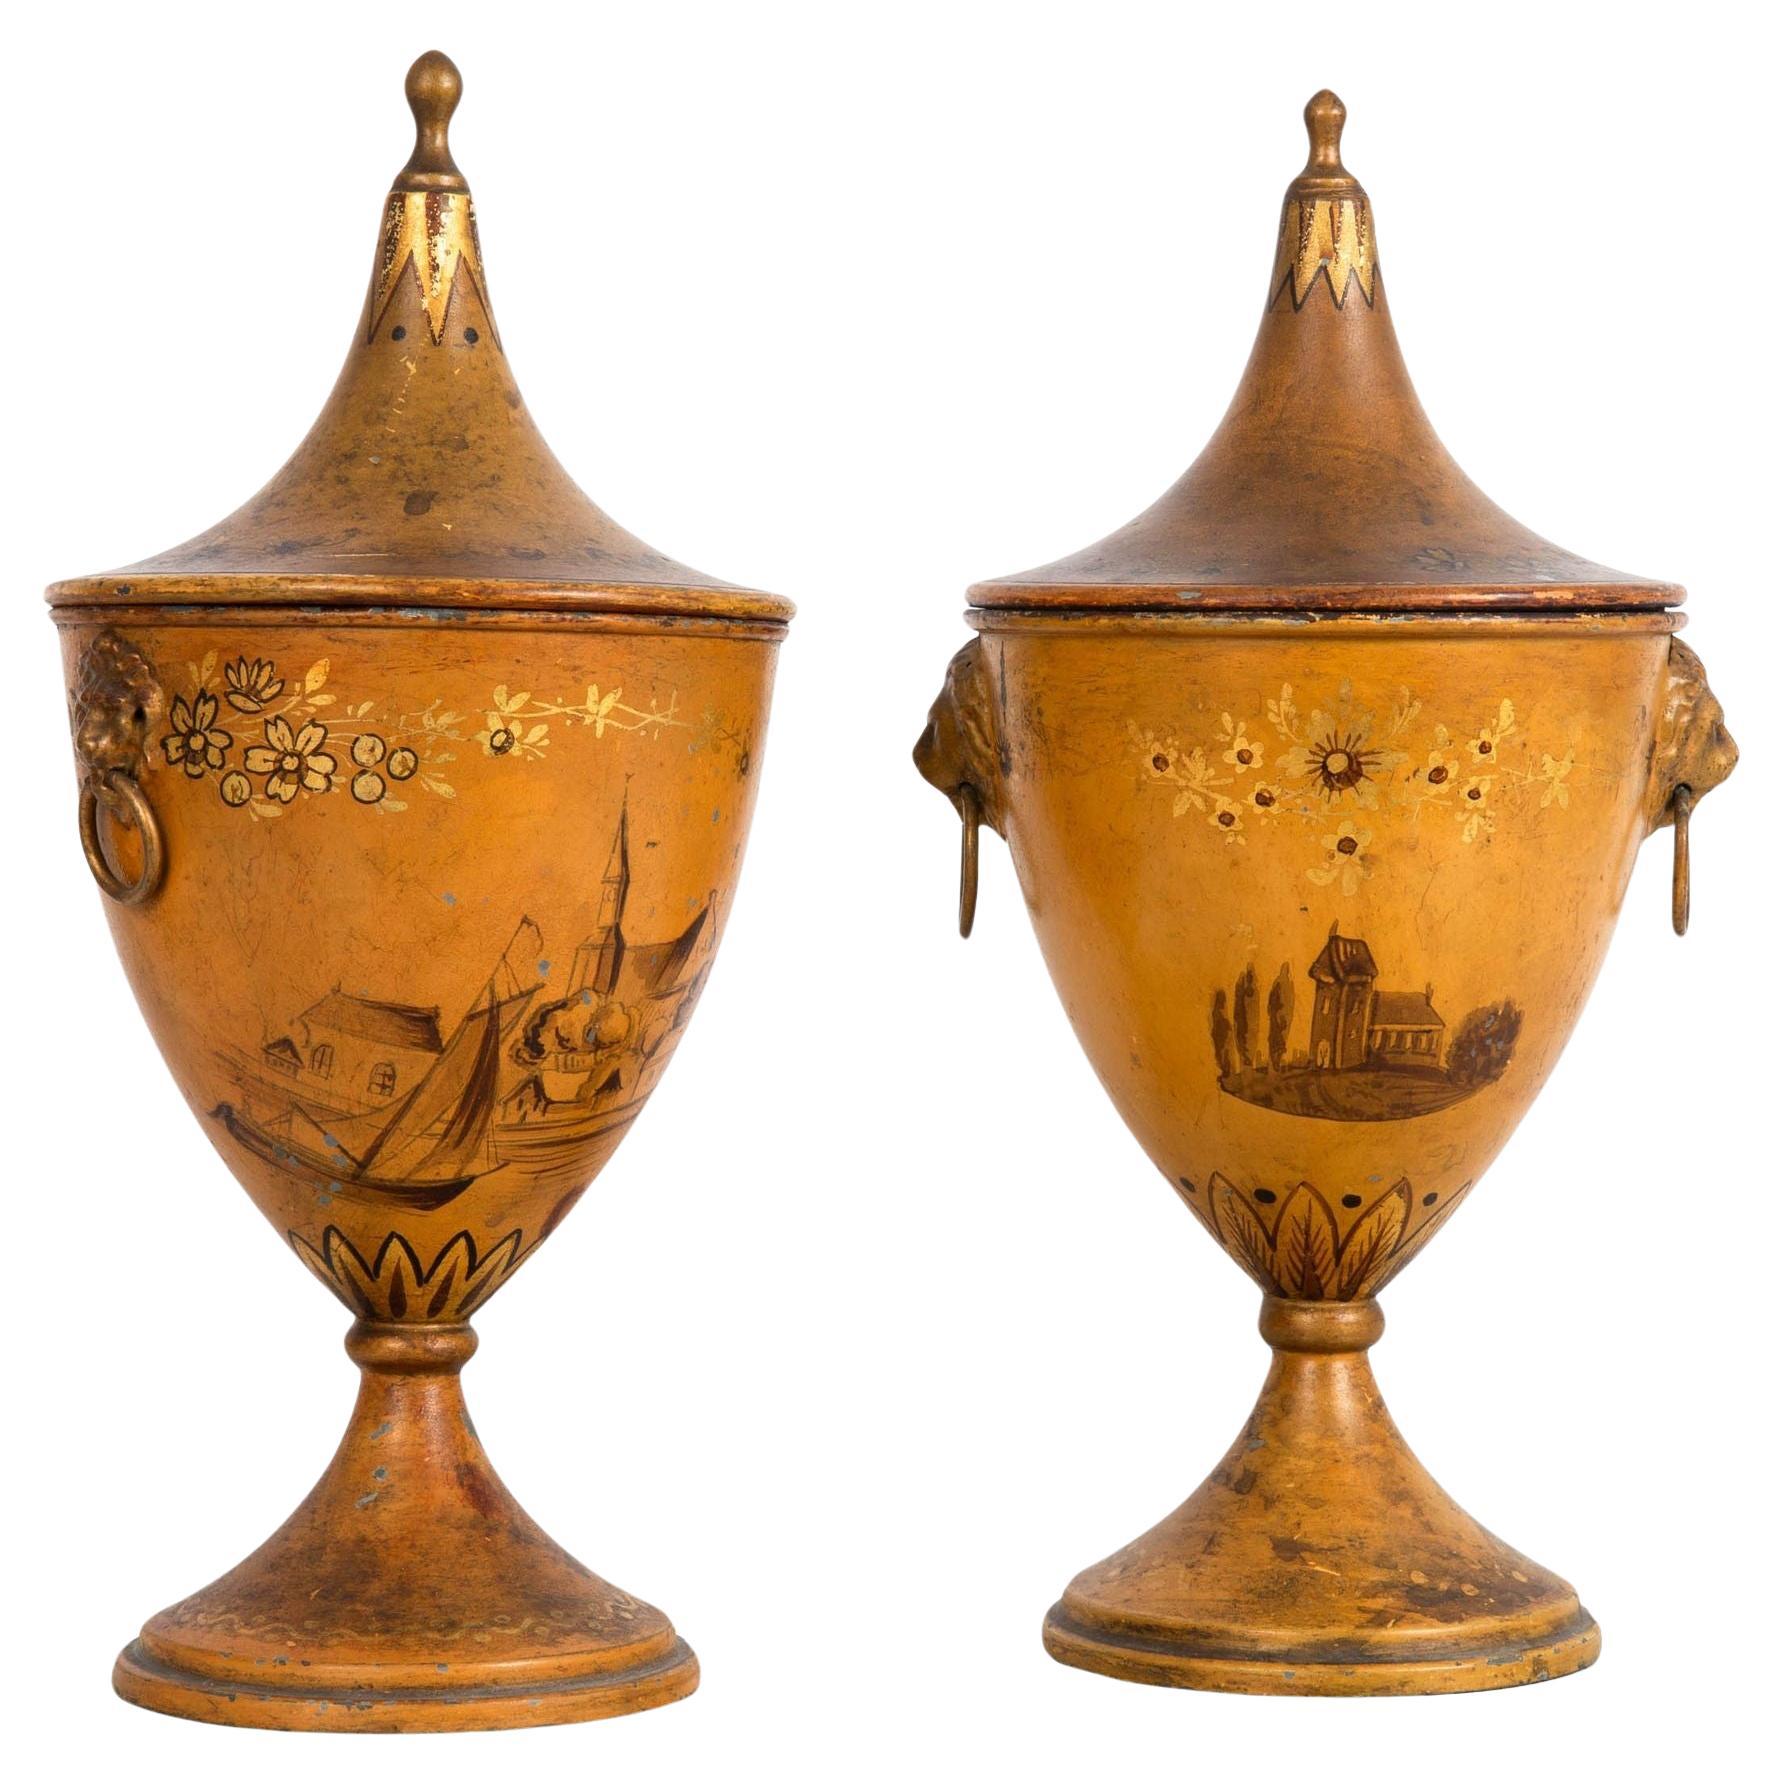 Fine 19th Century Near-Pair of Regency Tole-Painted Chestnut Urns For Sale